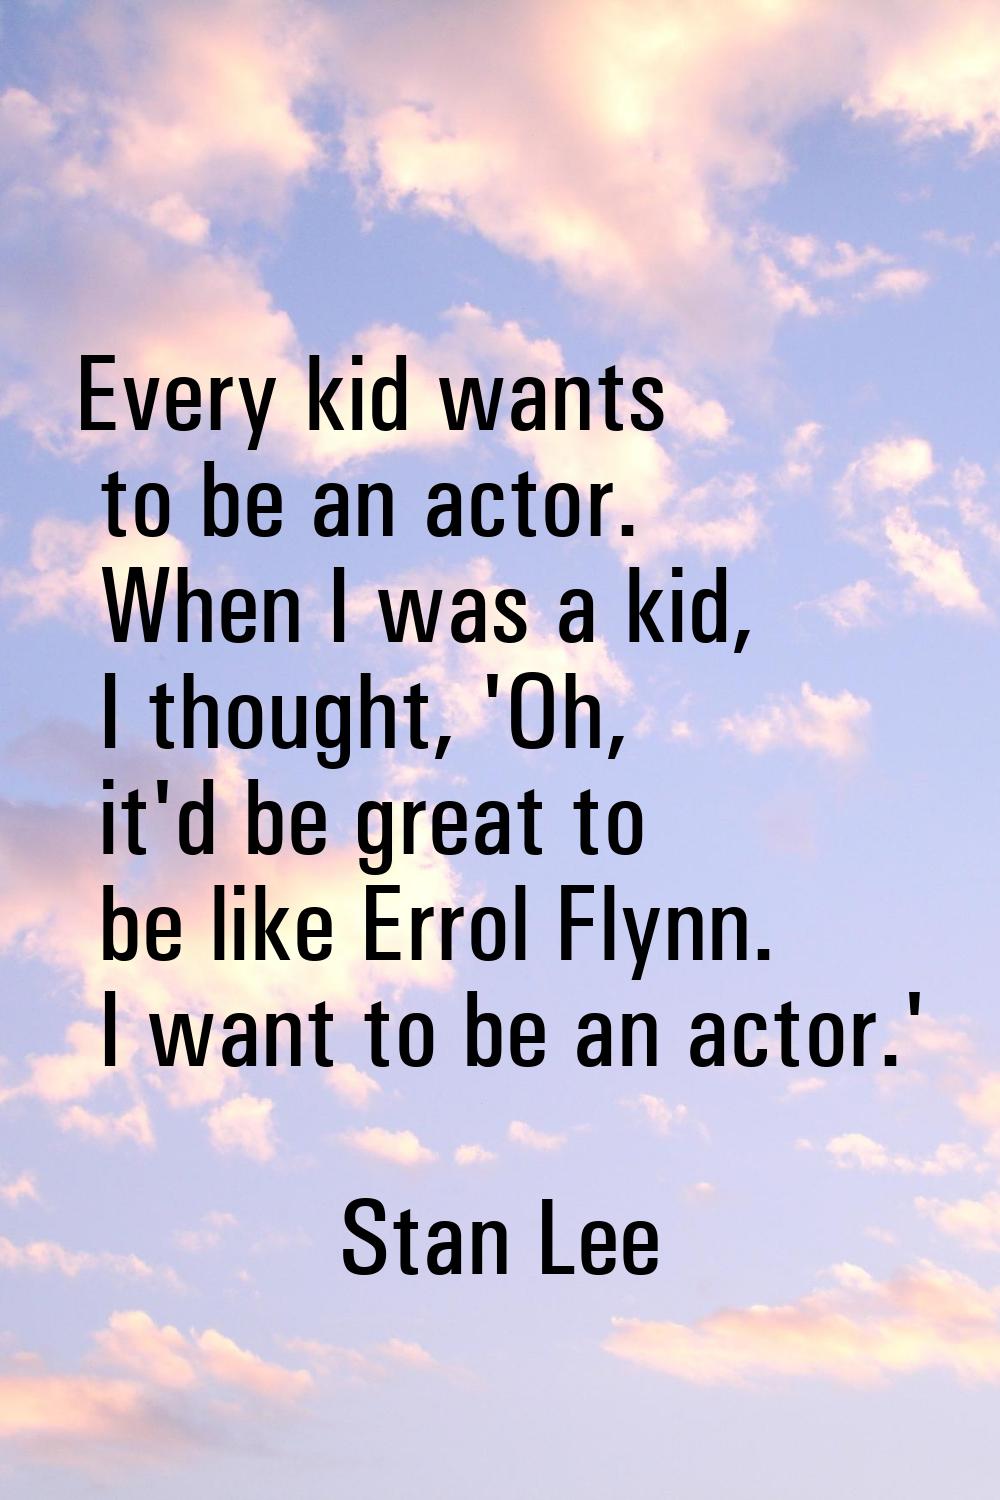 Every kid wants to be an actor. When I was a kid, I thought, 'Oh, it'd be great to be like Errol Fl